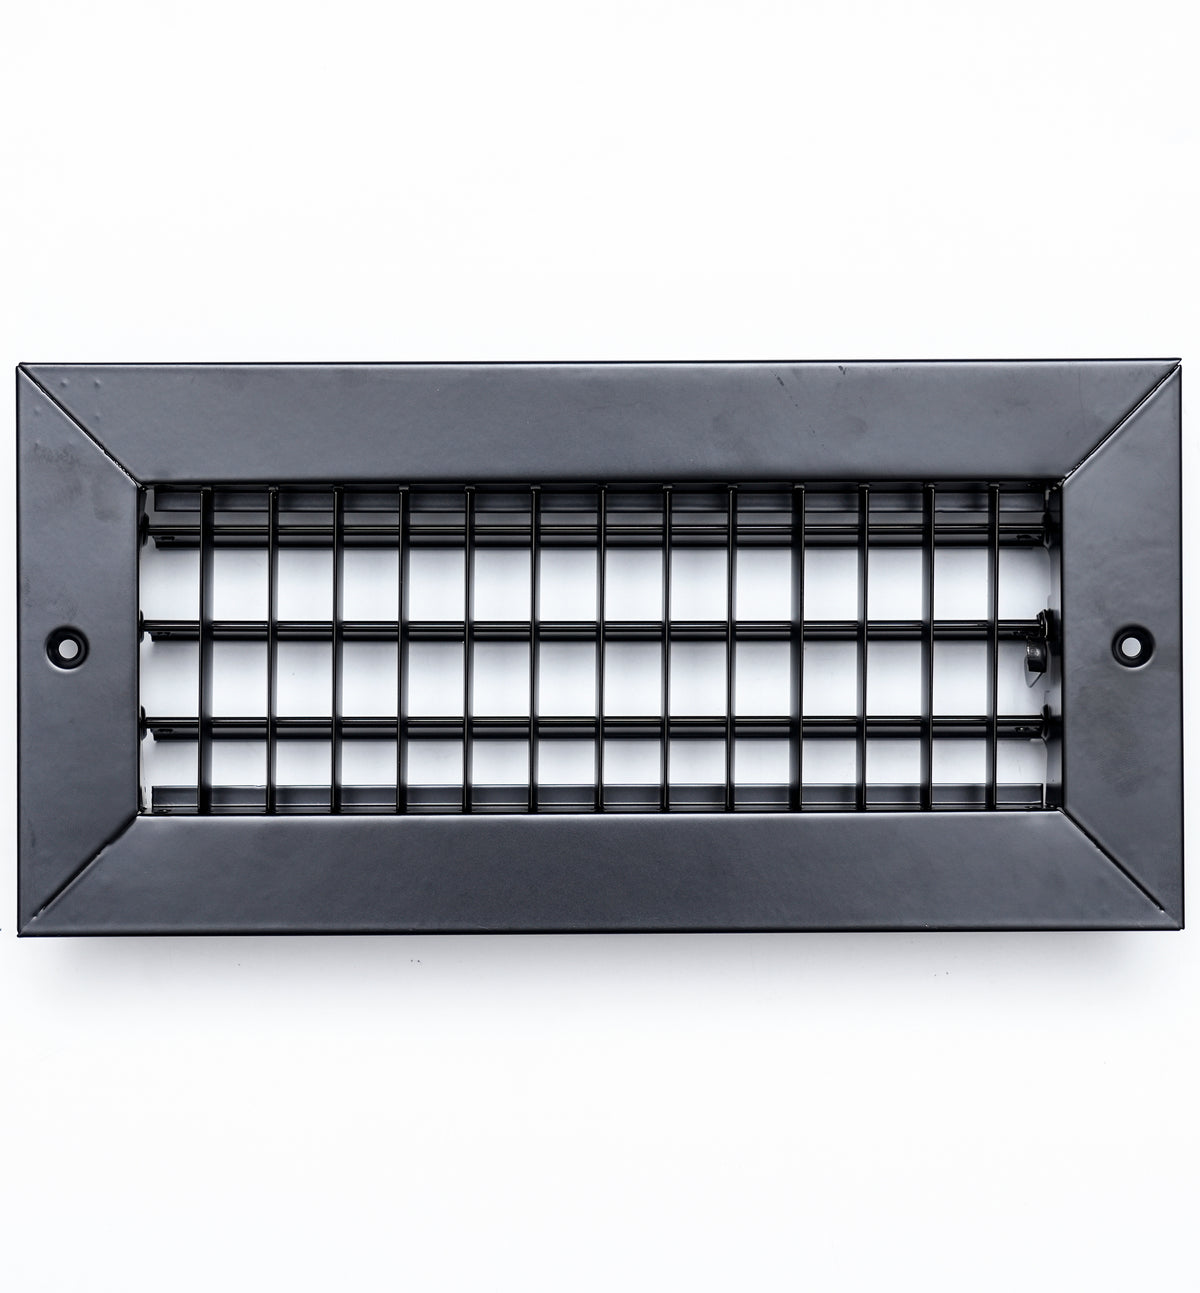 airgrilles 10x4 steel adjustable air supply grille register vent cover grill for sidewall and ceiling Black  Outer Dimensions: 11.75"W X 5.75"H for 10x4 Duct Opening